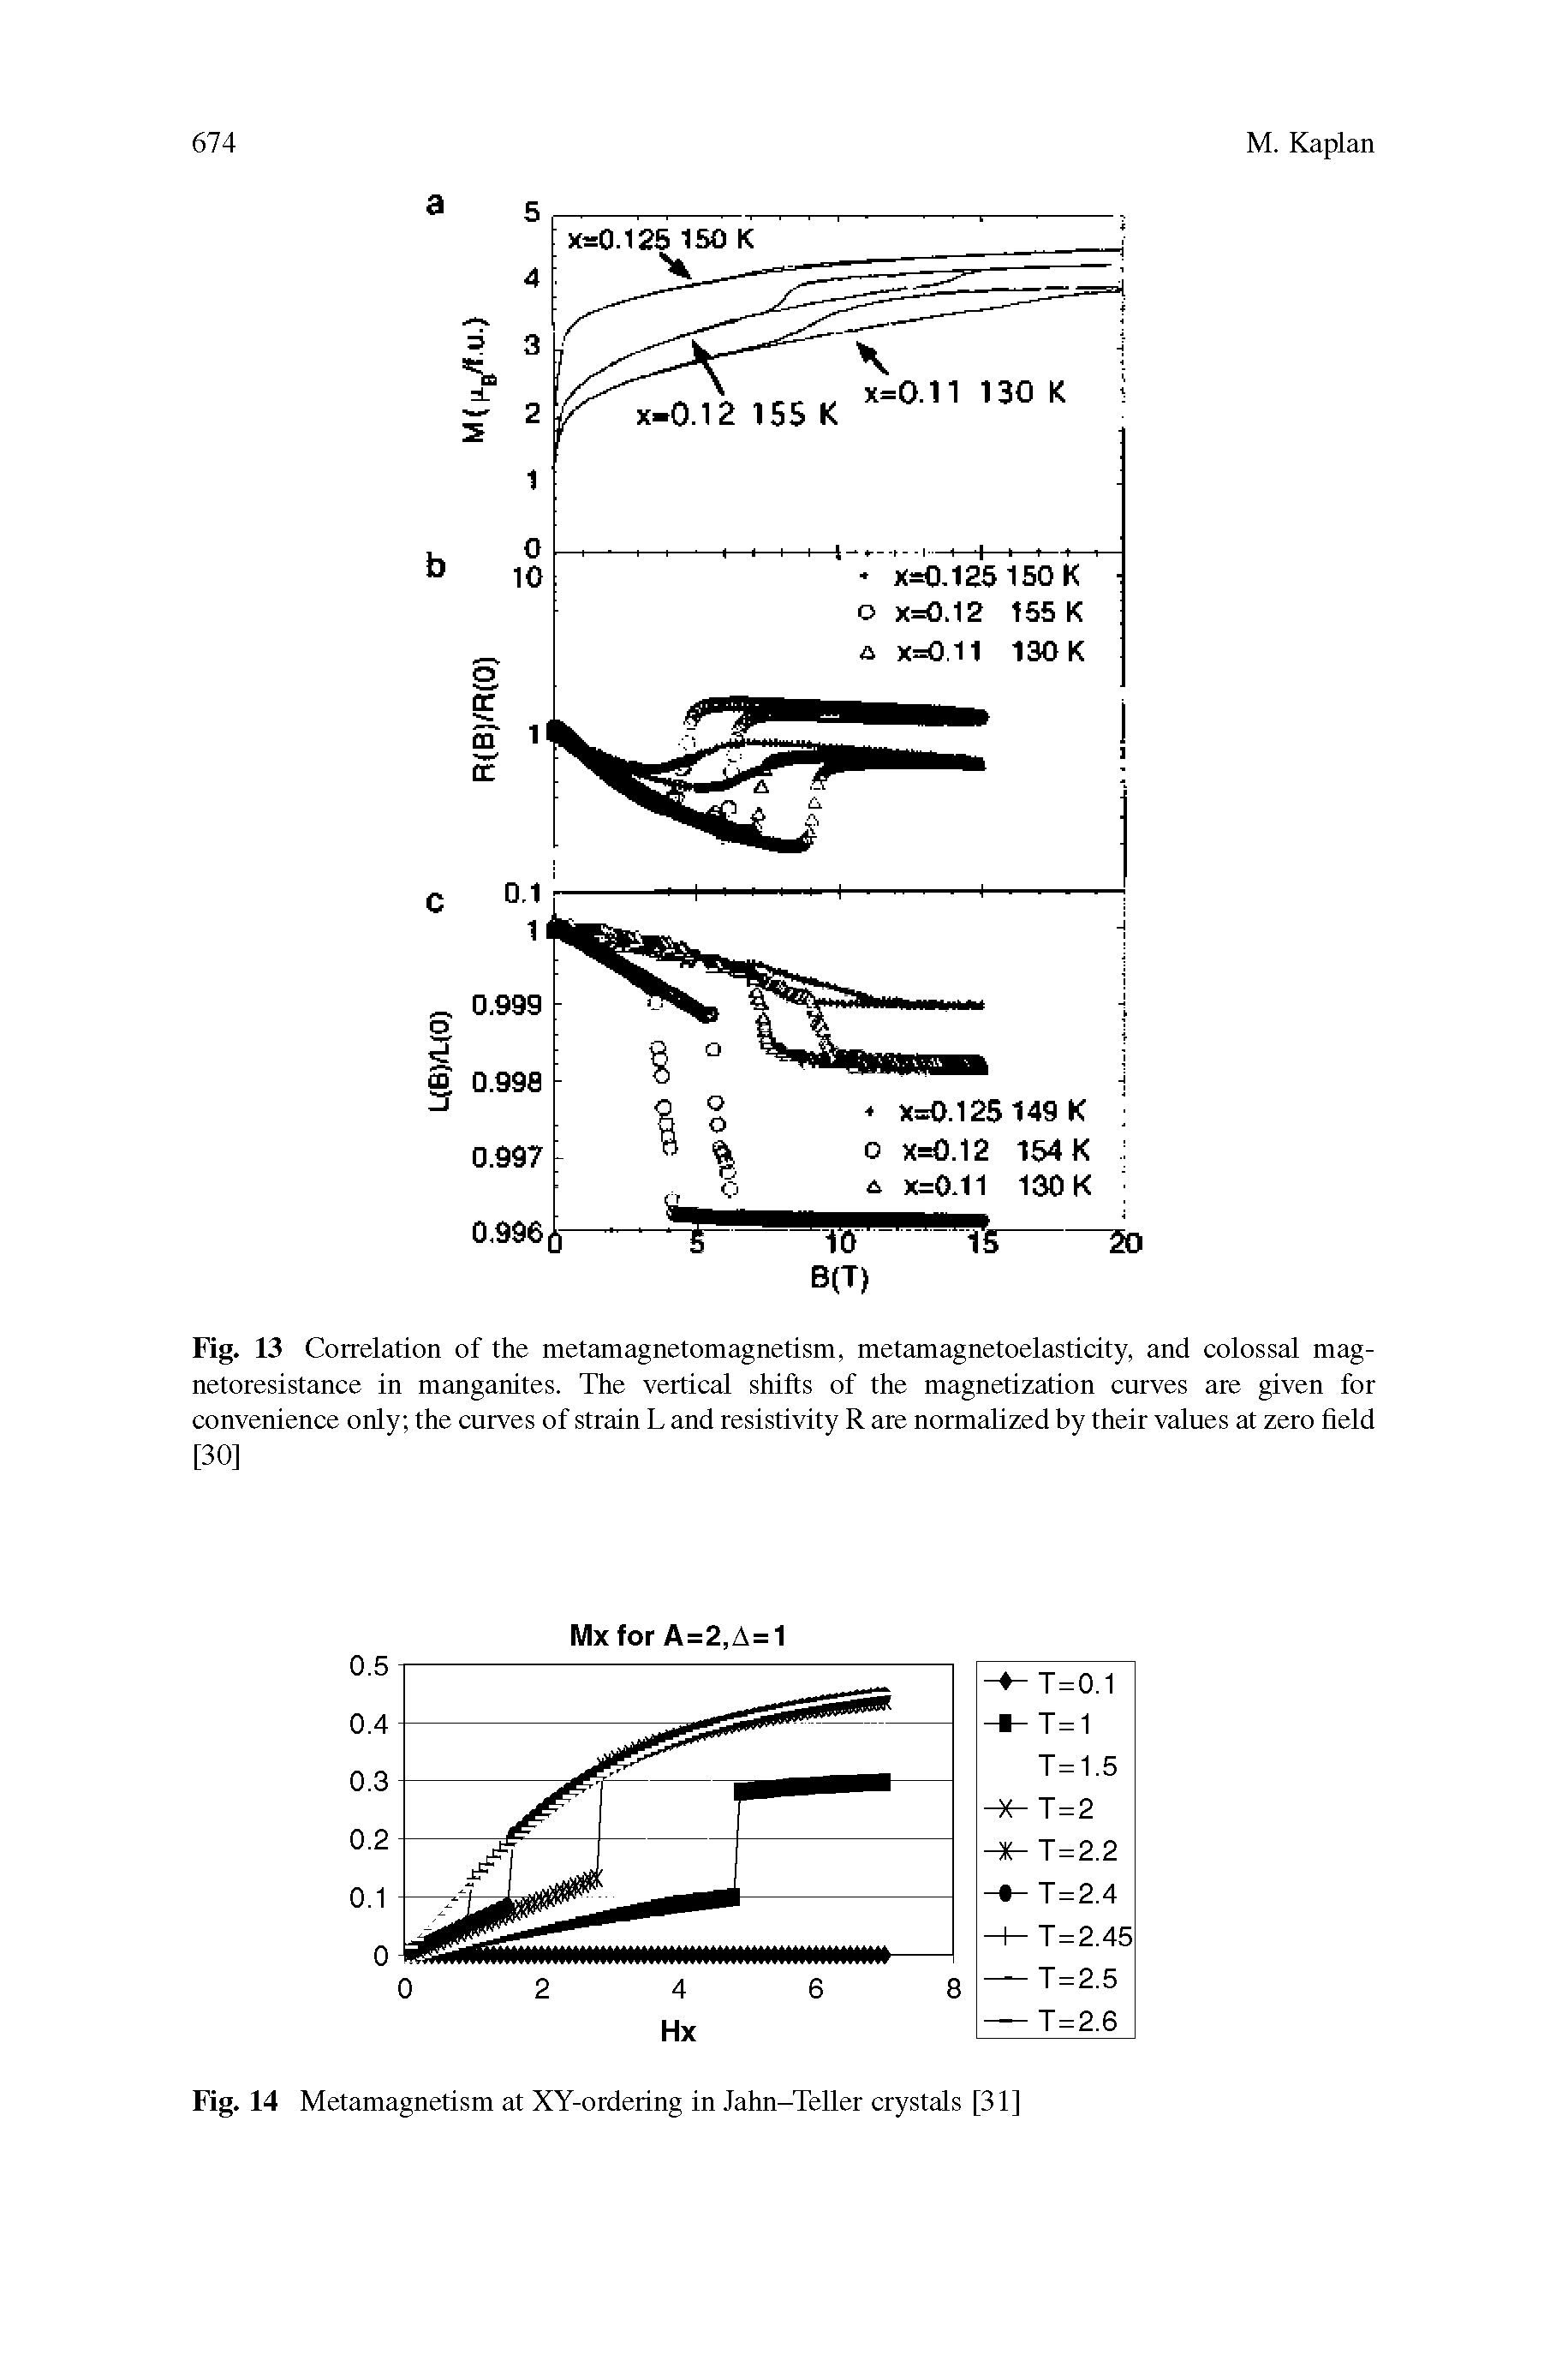 Fig. 13 Correlation of the metamagnetomagnetism, metamagnetoelasticity, and colossal magnetoresistance in manganites. The vertical shifts of the magnetization curves are given for convenience only the curves of strain L and resistivity R are normalized by their values at zero field [30]...